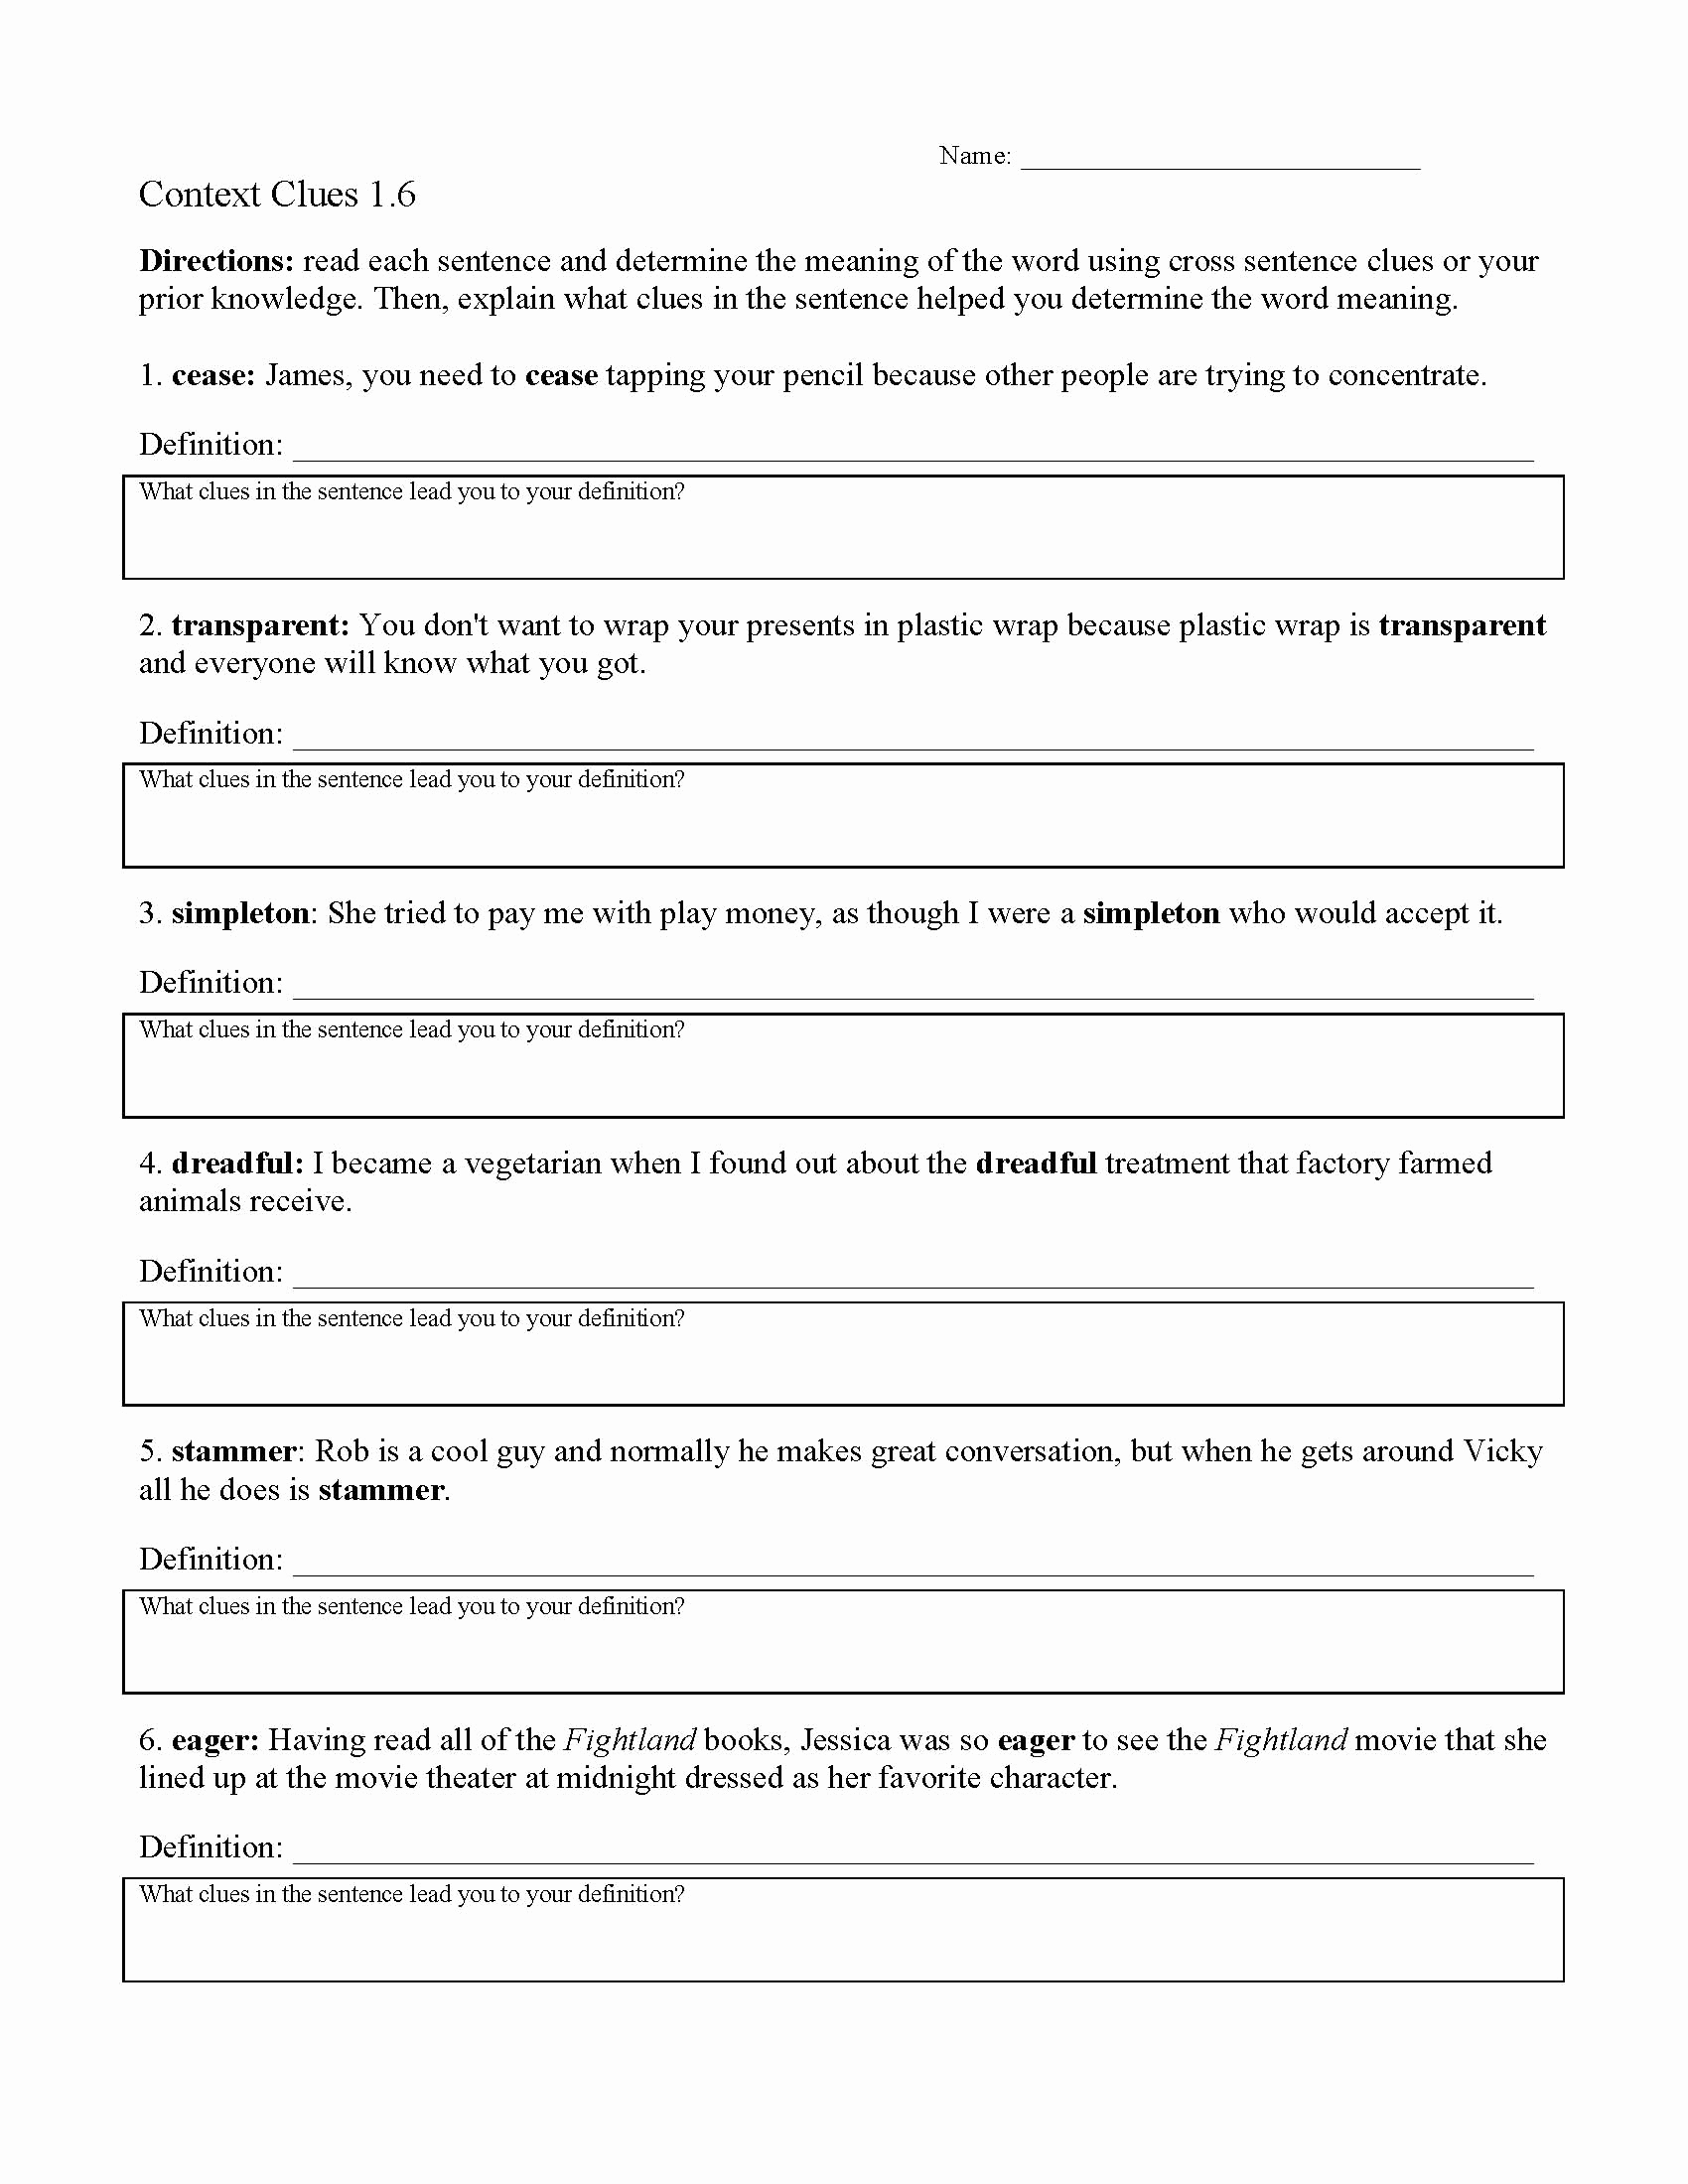 Grammar Worksheets Middle School Pdf Awesome Grammar Worksheets Middle School Pdf – Worksheet From Home